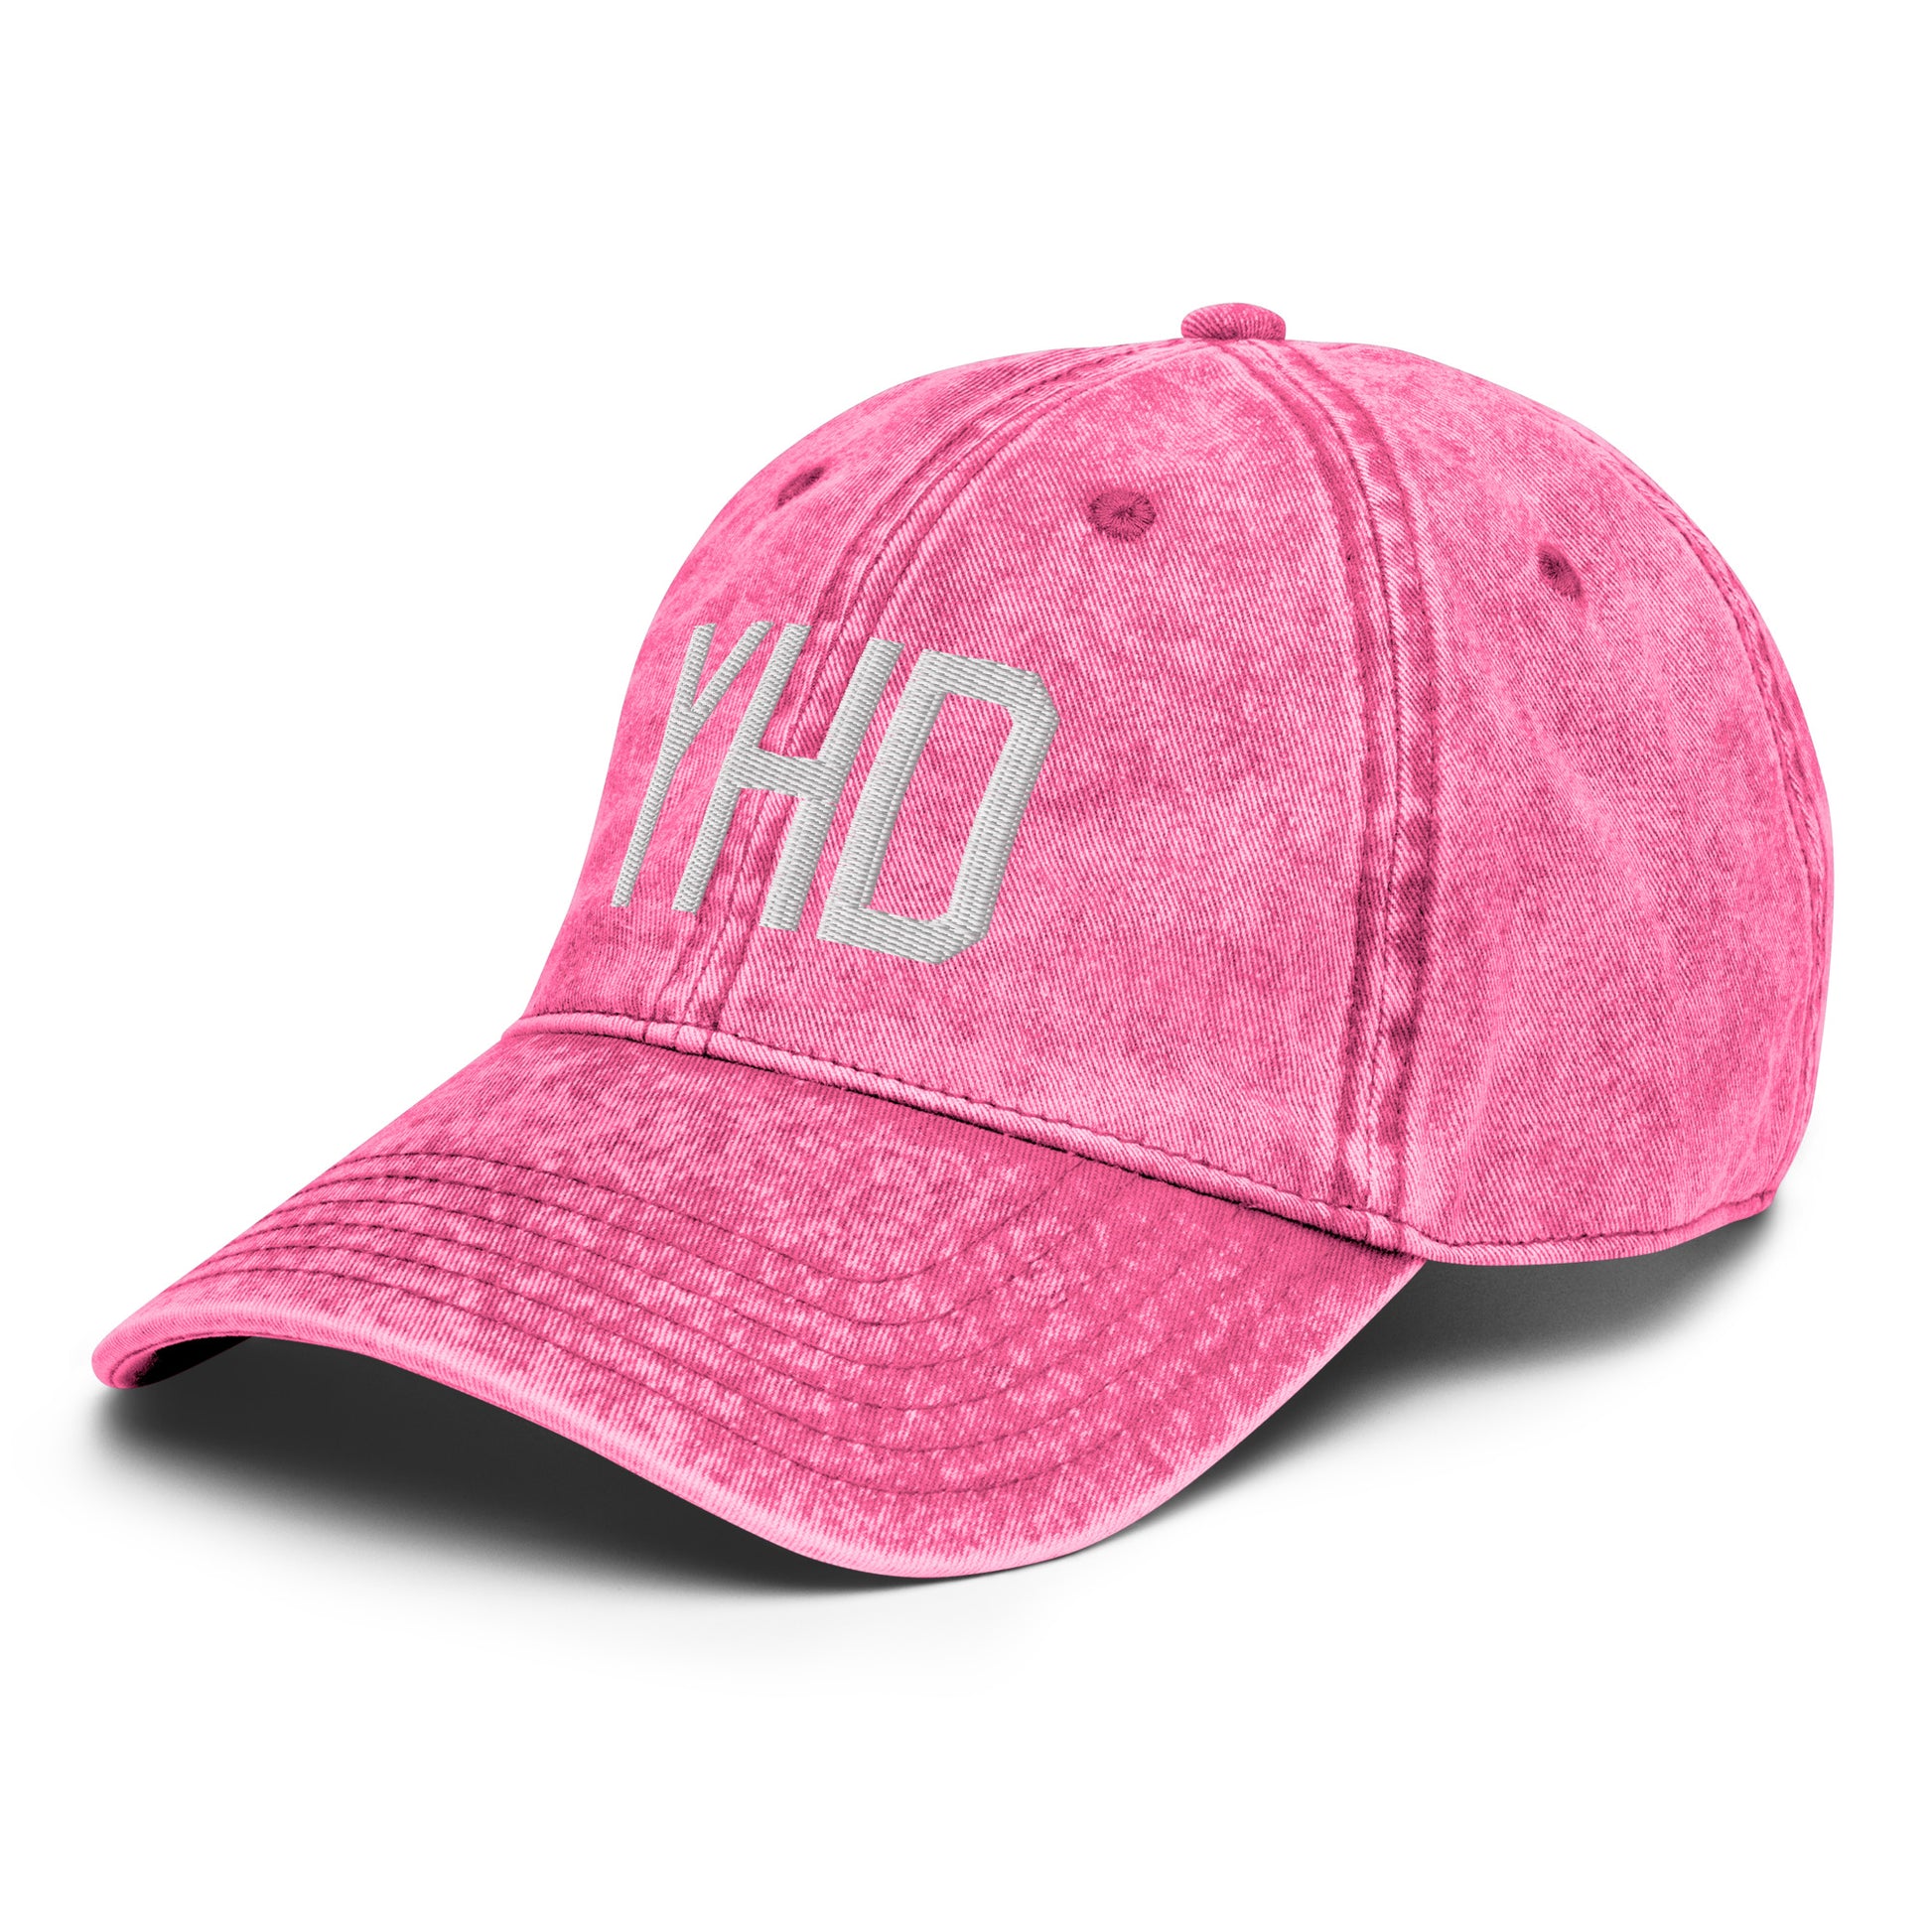 Airport Code Twill Cap - White • YHD Dryden • YHM Designs - Image 26